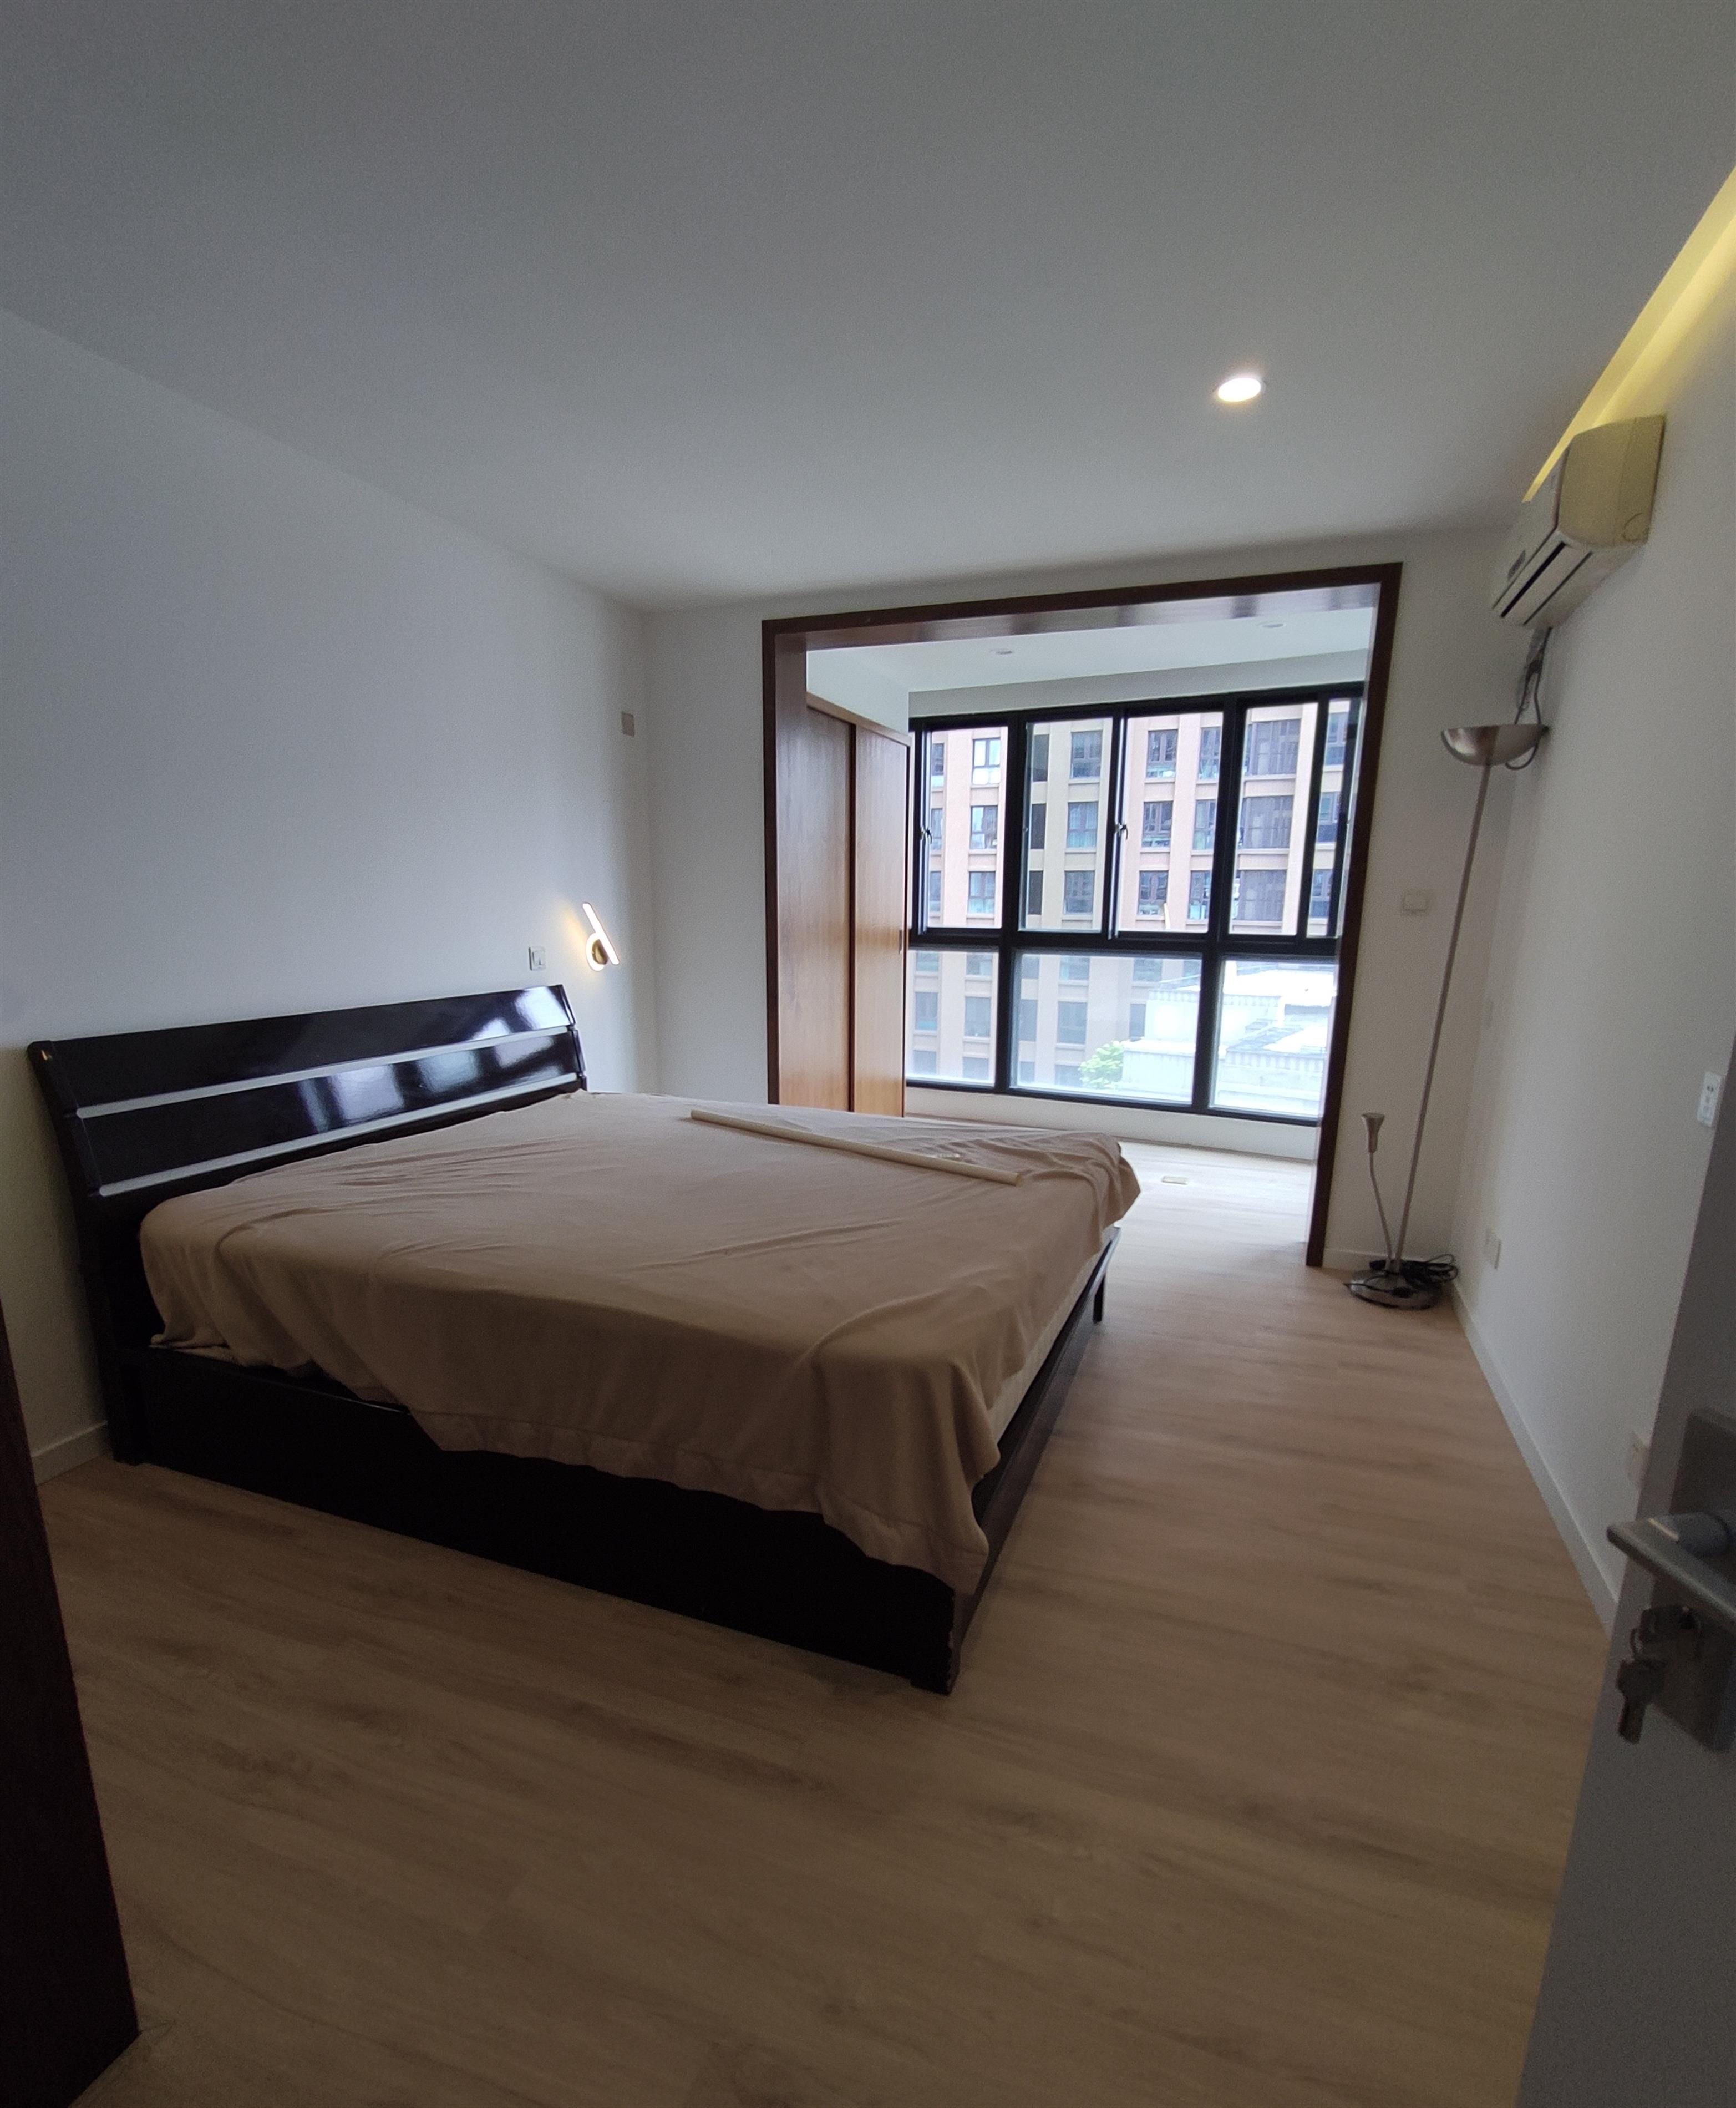 new bed Newly Renovated Spacious Convenient 3BR FFC Apartment nr LN 8/9/10/13 for Rent in Shanghai